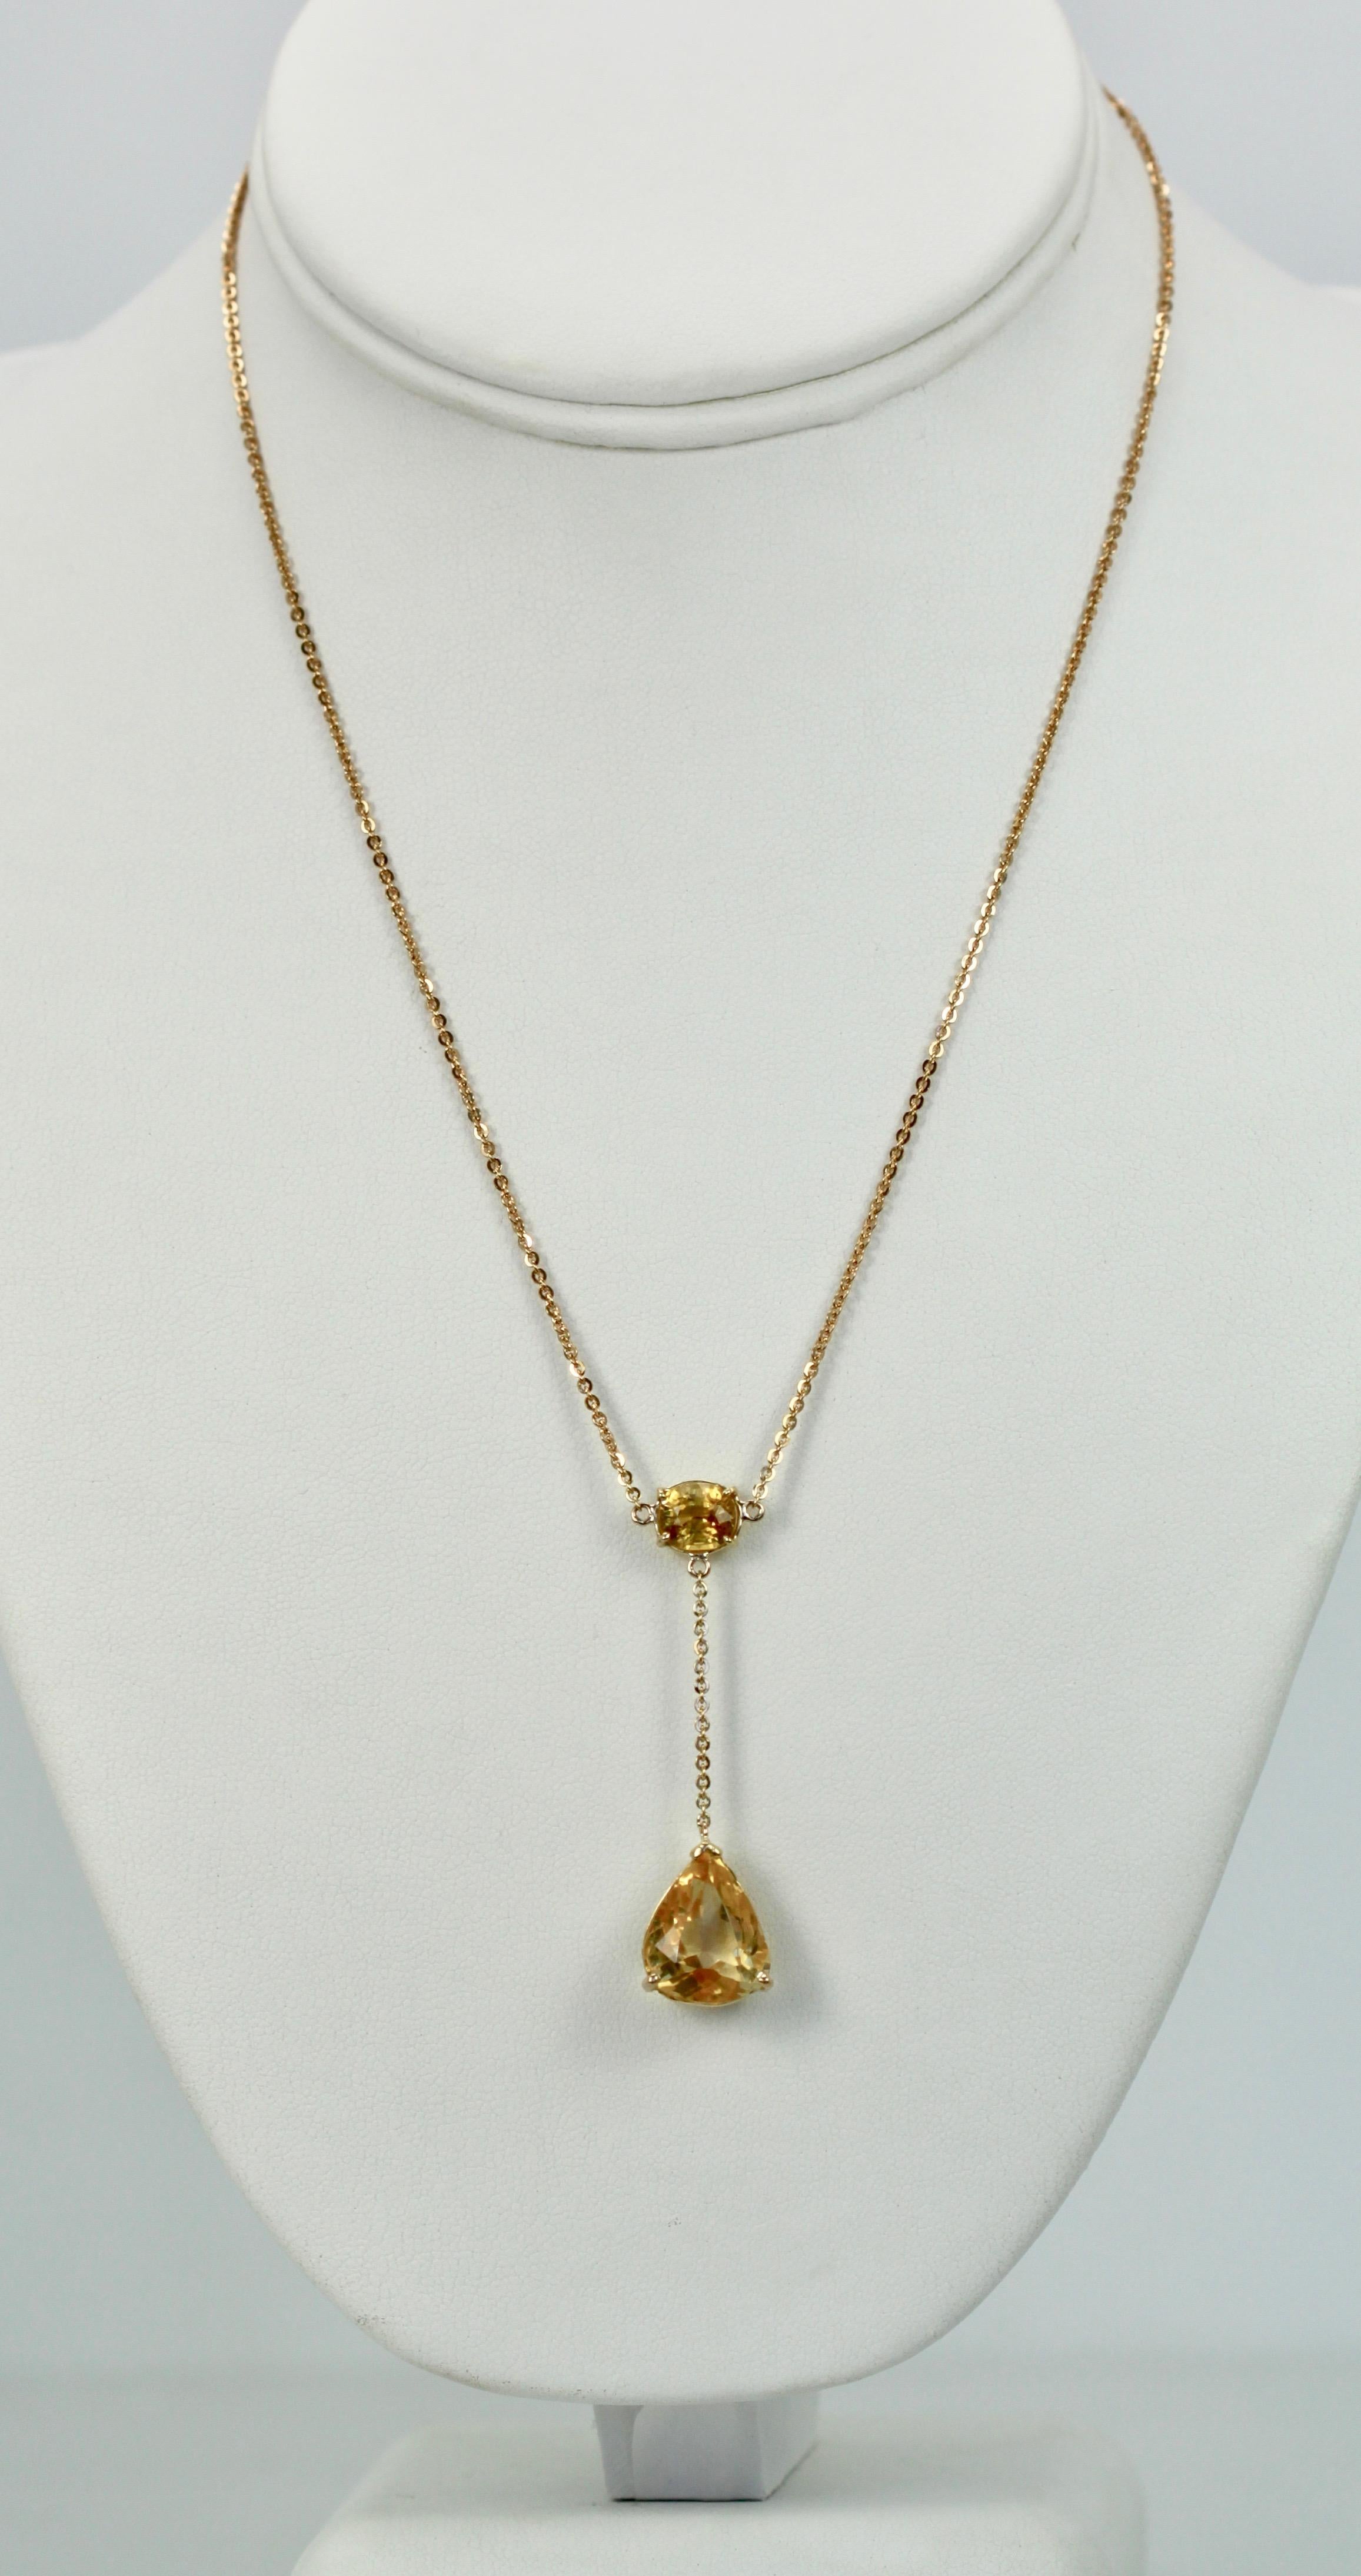 Simple but lovely this Citrine Drop Necklace is set in 18K Yellow Gold. This necklace has two Citrines, one oval citrine of 1.25 Carats and a pear shaped Citrine of approximately 6 Carats.  All in all the necklace boosts 7.25 carats of beautiful